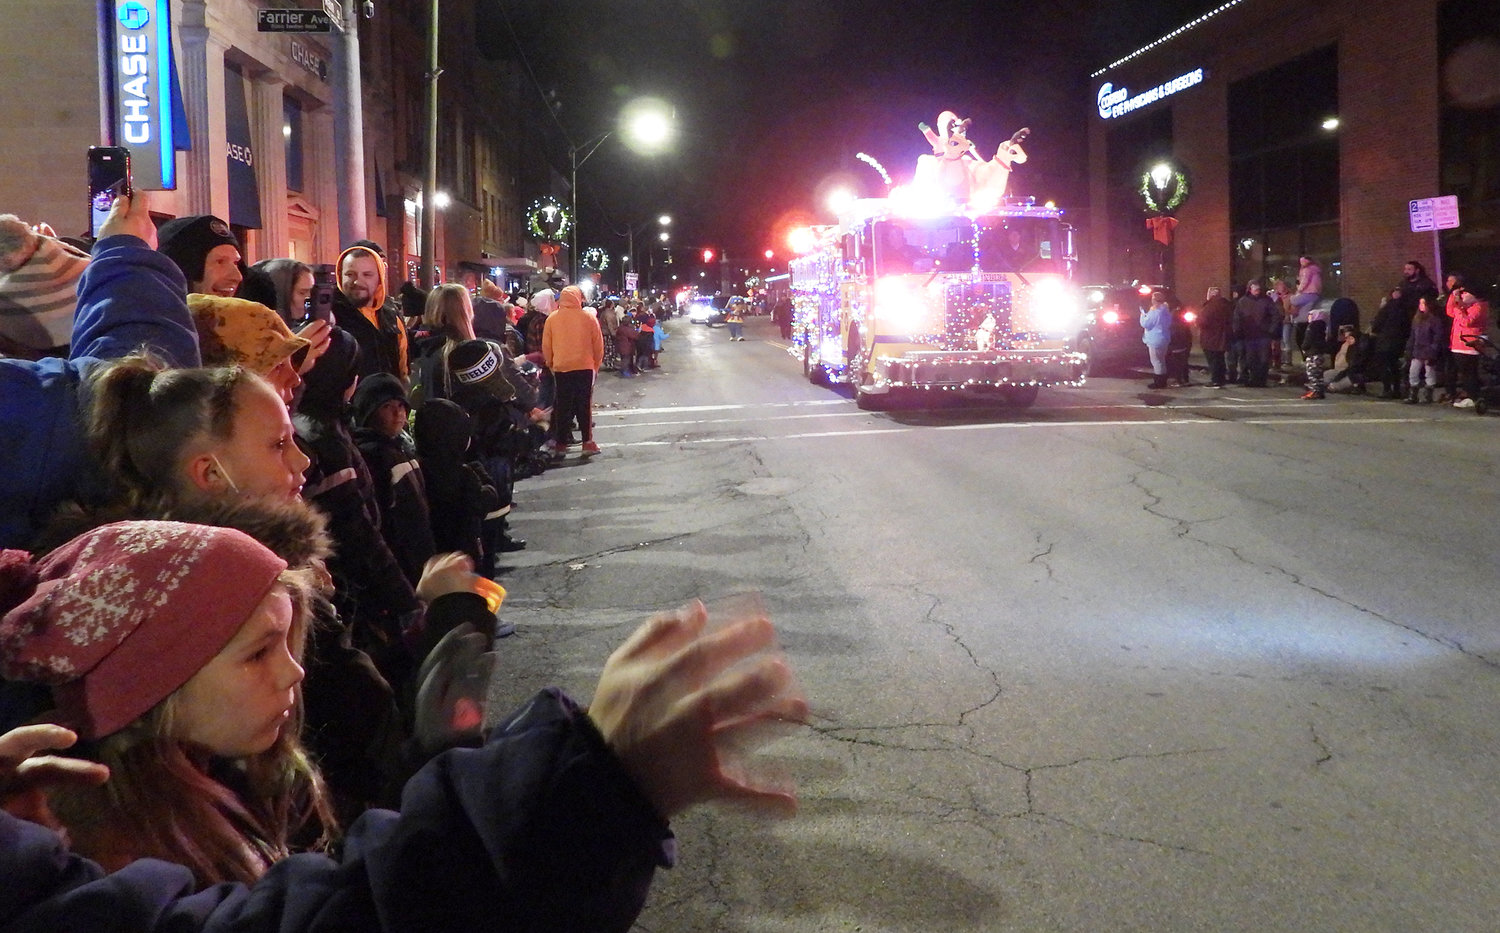 Oneida’s Second Annual Parade of Lights is set to take place this Friday at 6:30 p.m., following a visit from Santa Claus and the city’s annual tree lighting ceremony.